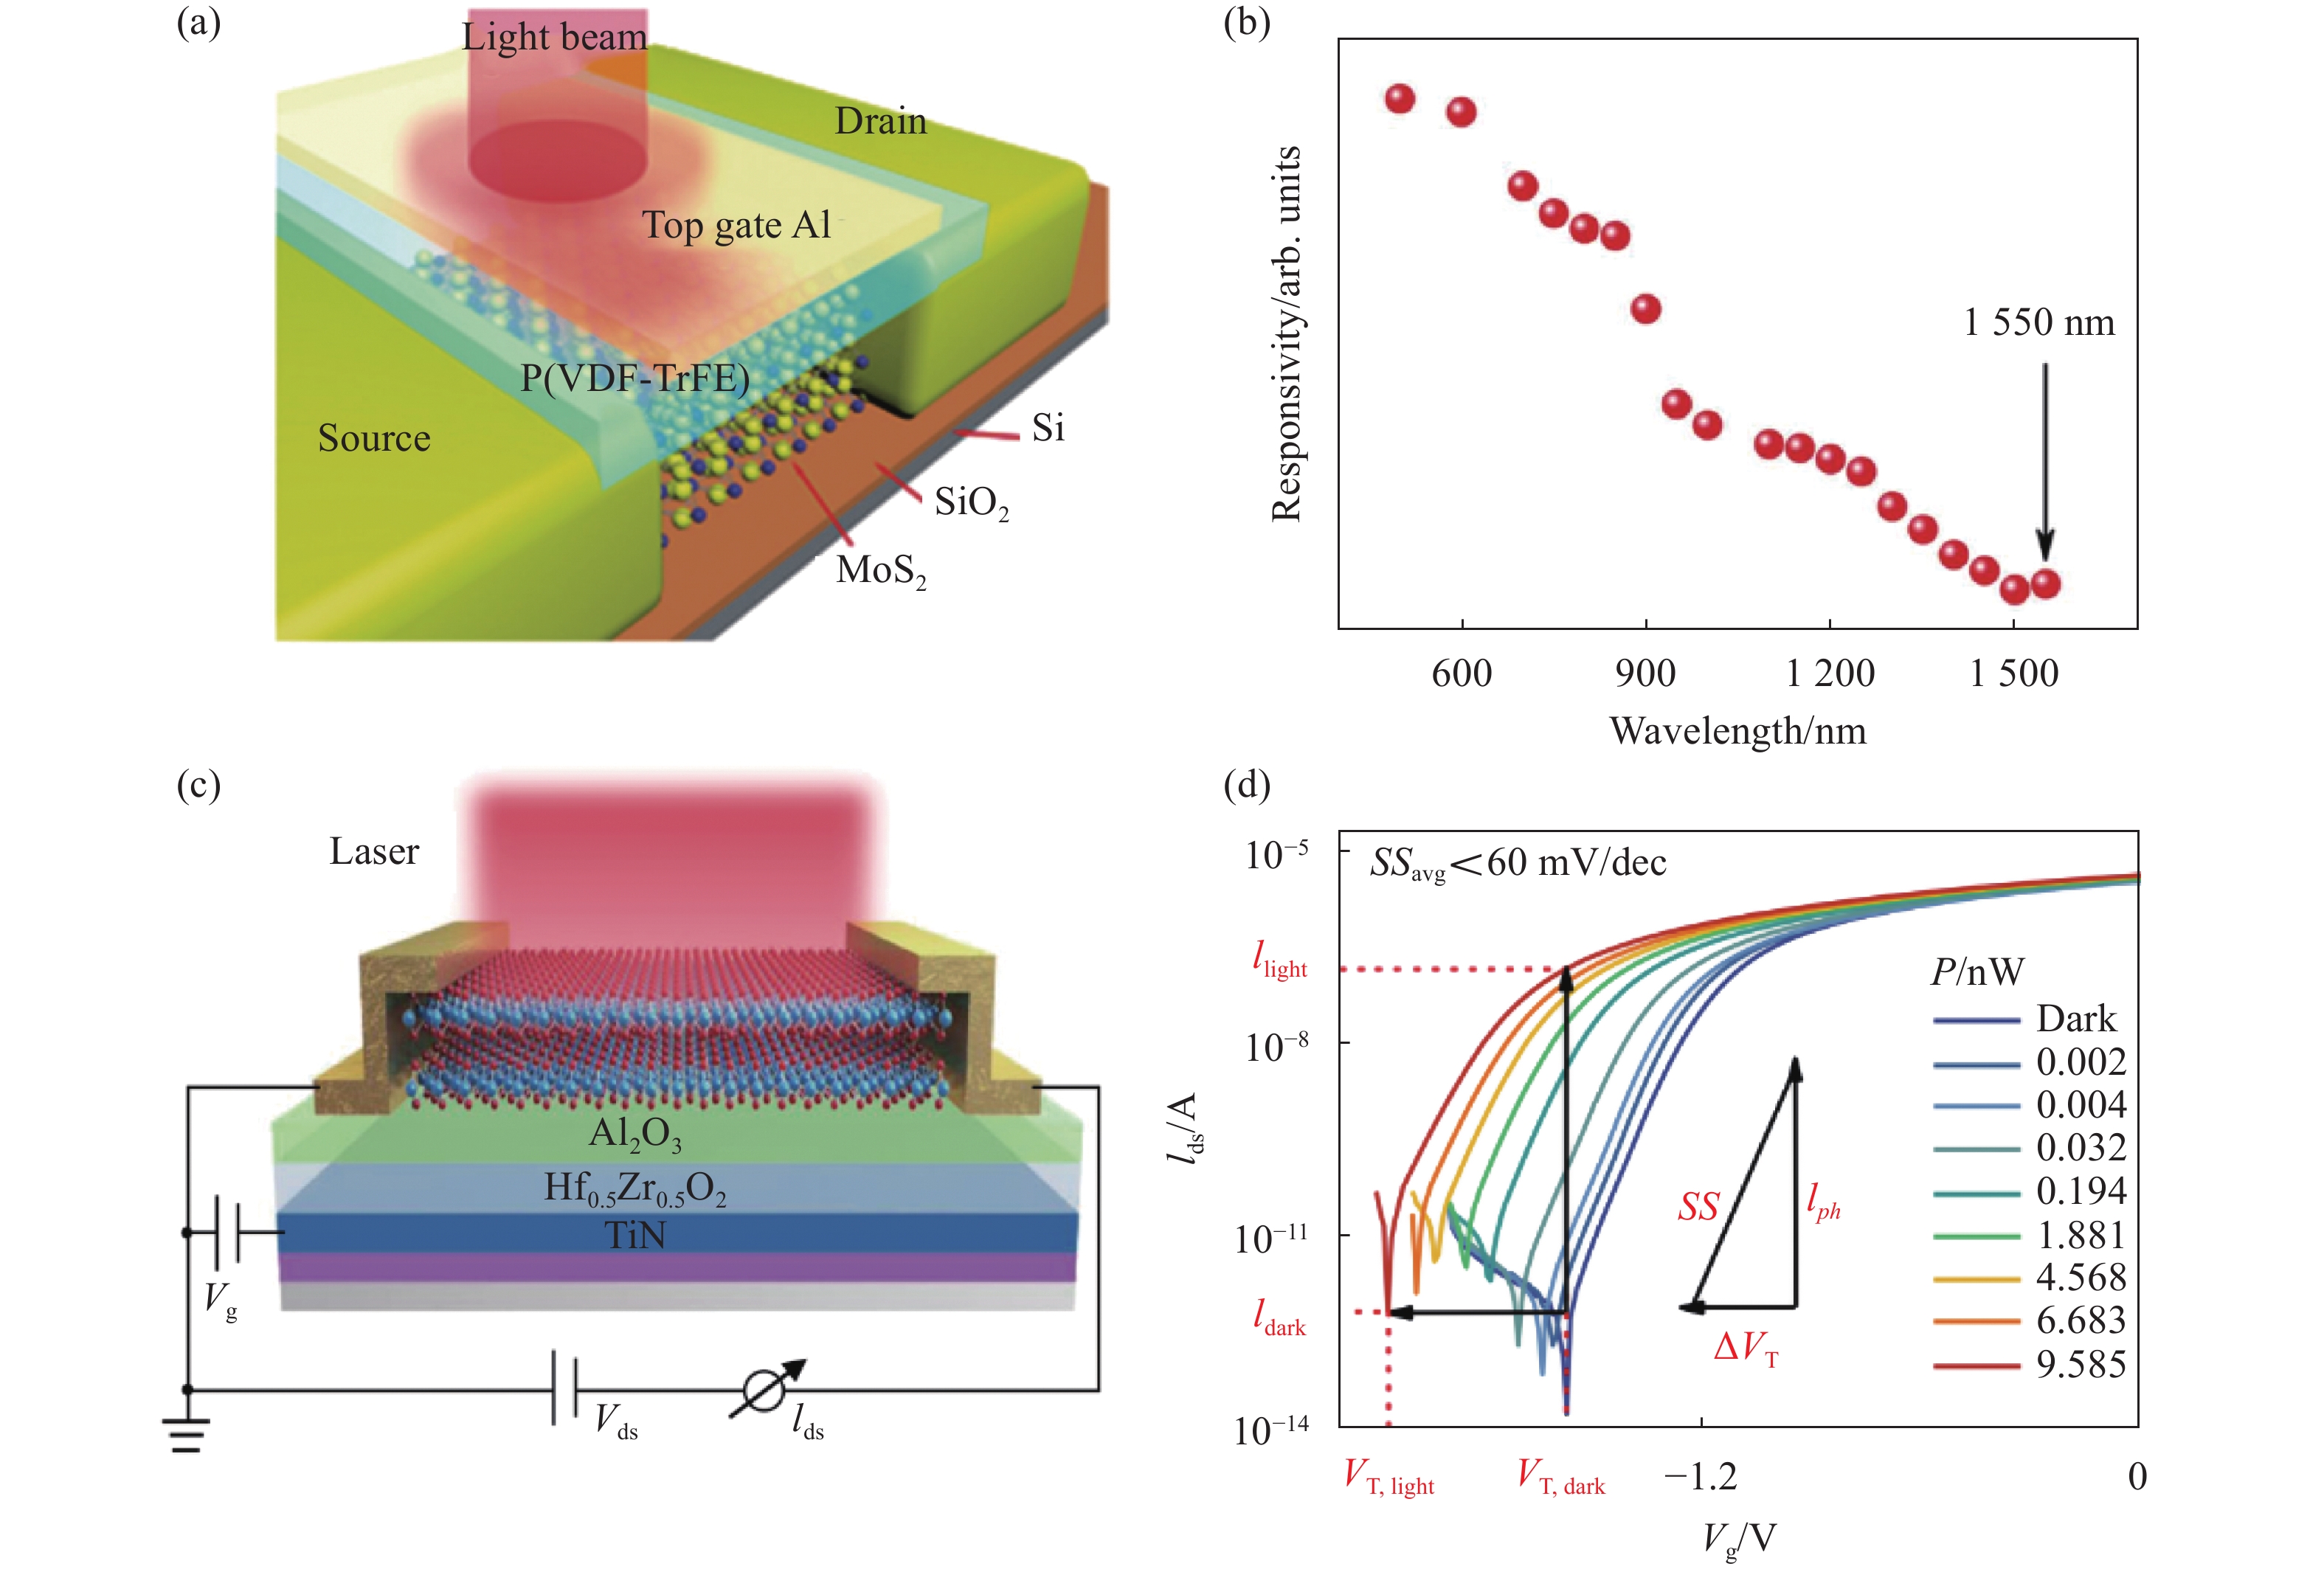 Ferroelectric localized field-enhanced MoS2 photodetector. (a) Schematic diagram of MoS2 top-gate device structure tuned by ferroelectric material； (b) Photoresponsivity under different wavelength[14]； (c) Schematic diagram of structure and test circuit of MoS2 negative capacitance field effect transistor tuned by ferroelectric material； (d) Transfer characteristic curves under different incident light powers[23]